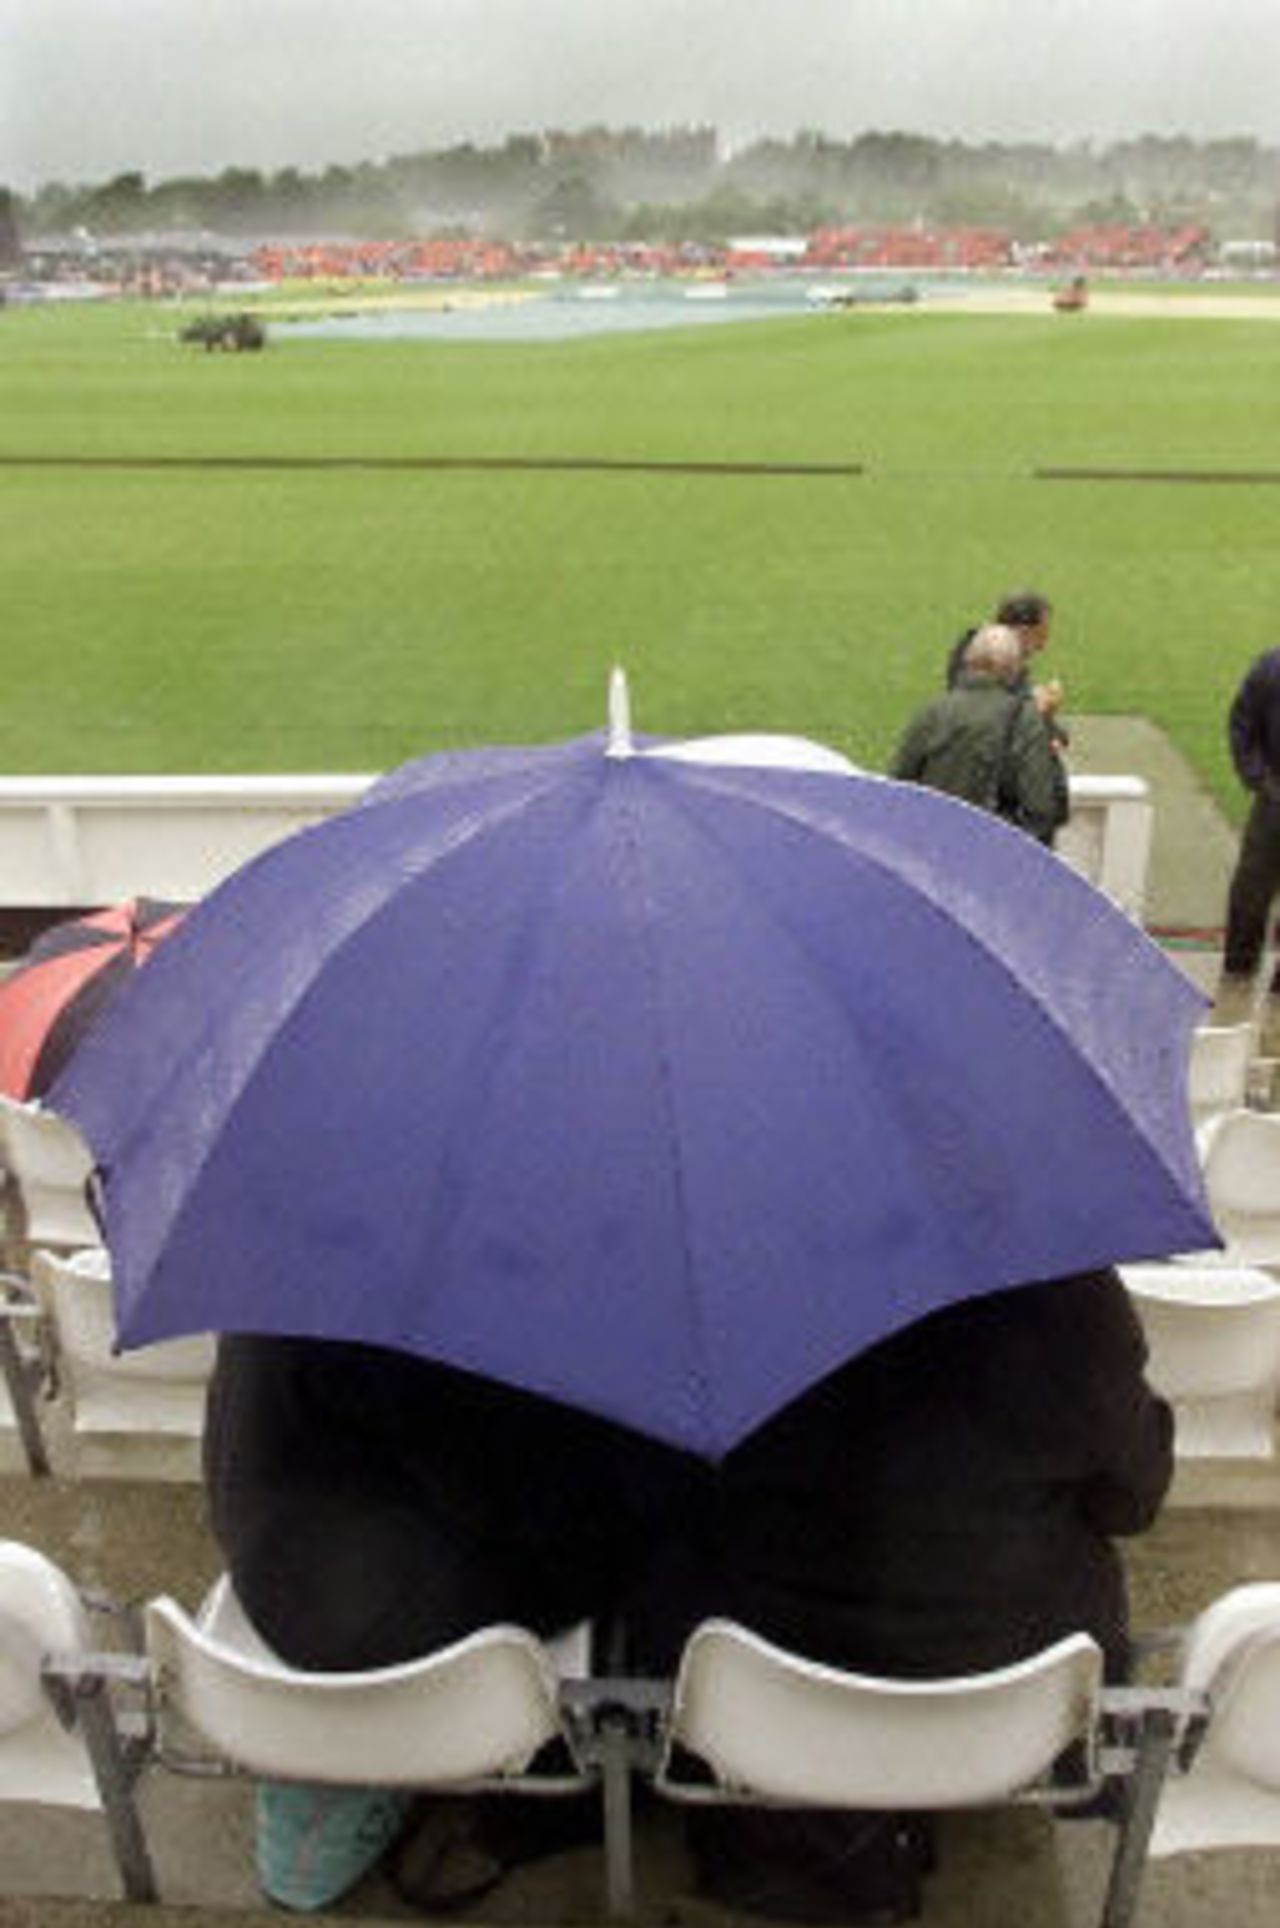 Cricket fans sit in the driving rain which has delayed the start of the Australia v Pakistan one-day game, 6th ODI at Chester-le-Street, 16 June 2001.